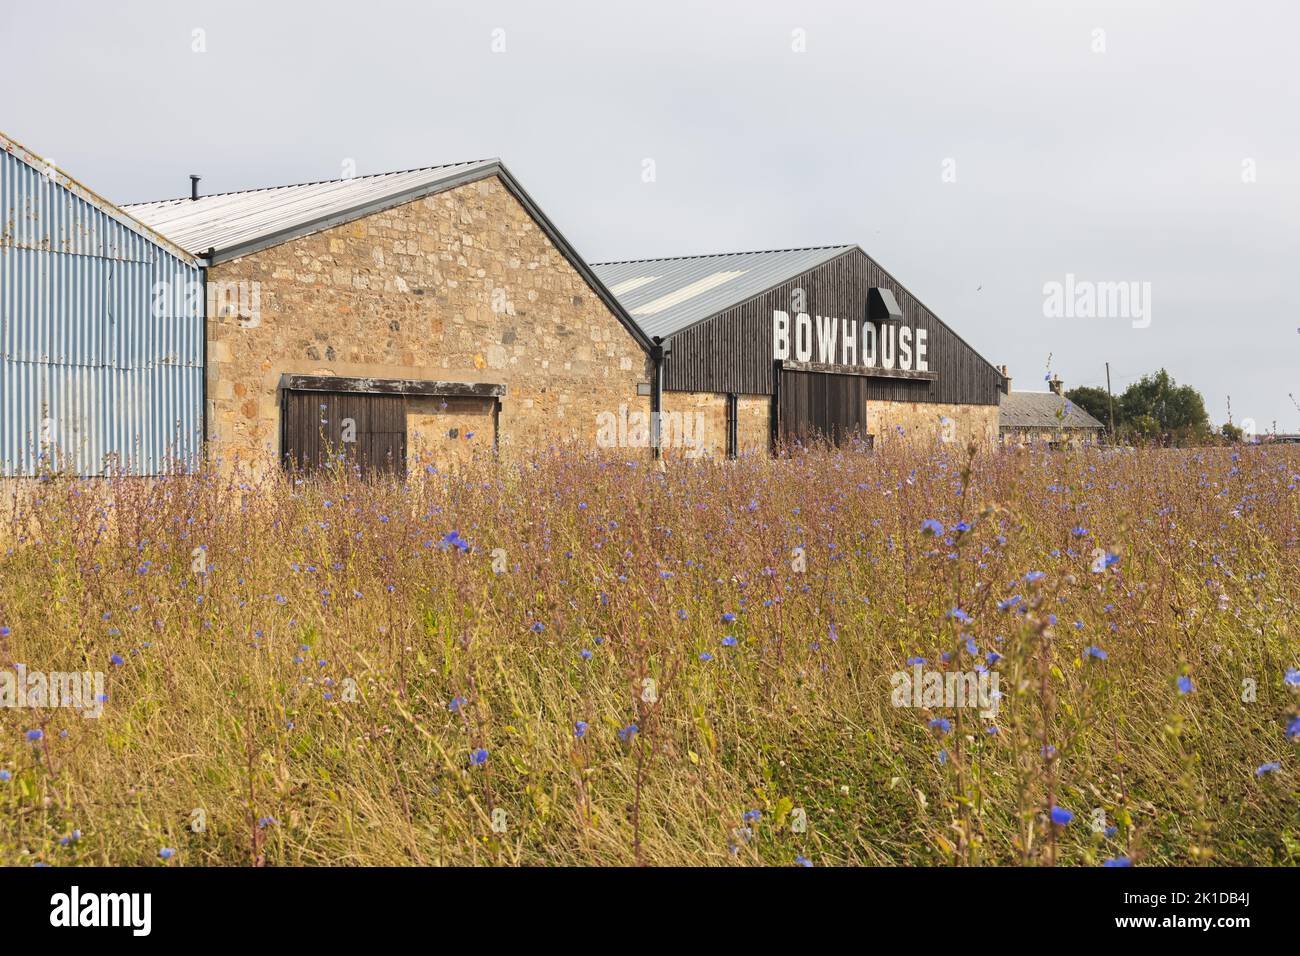 East Neuk, UK - August 14, 2022: Bowhouse Farmer's Market in the rural country farmland of East Neuk in Fife, Scotland, on a sunny day. Stock Photo